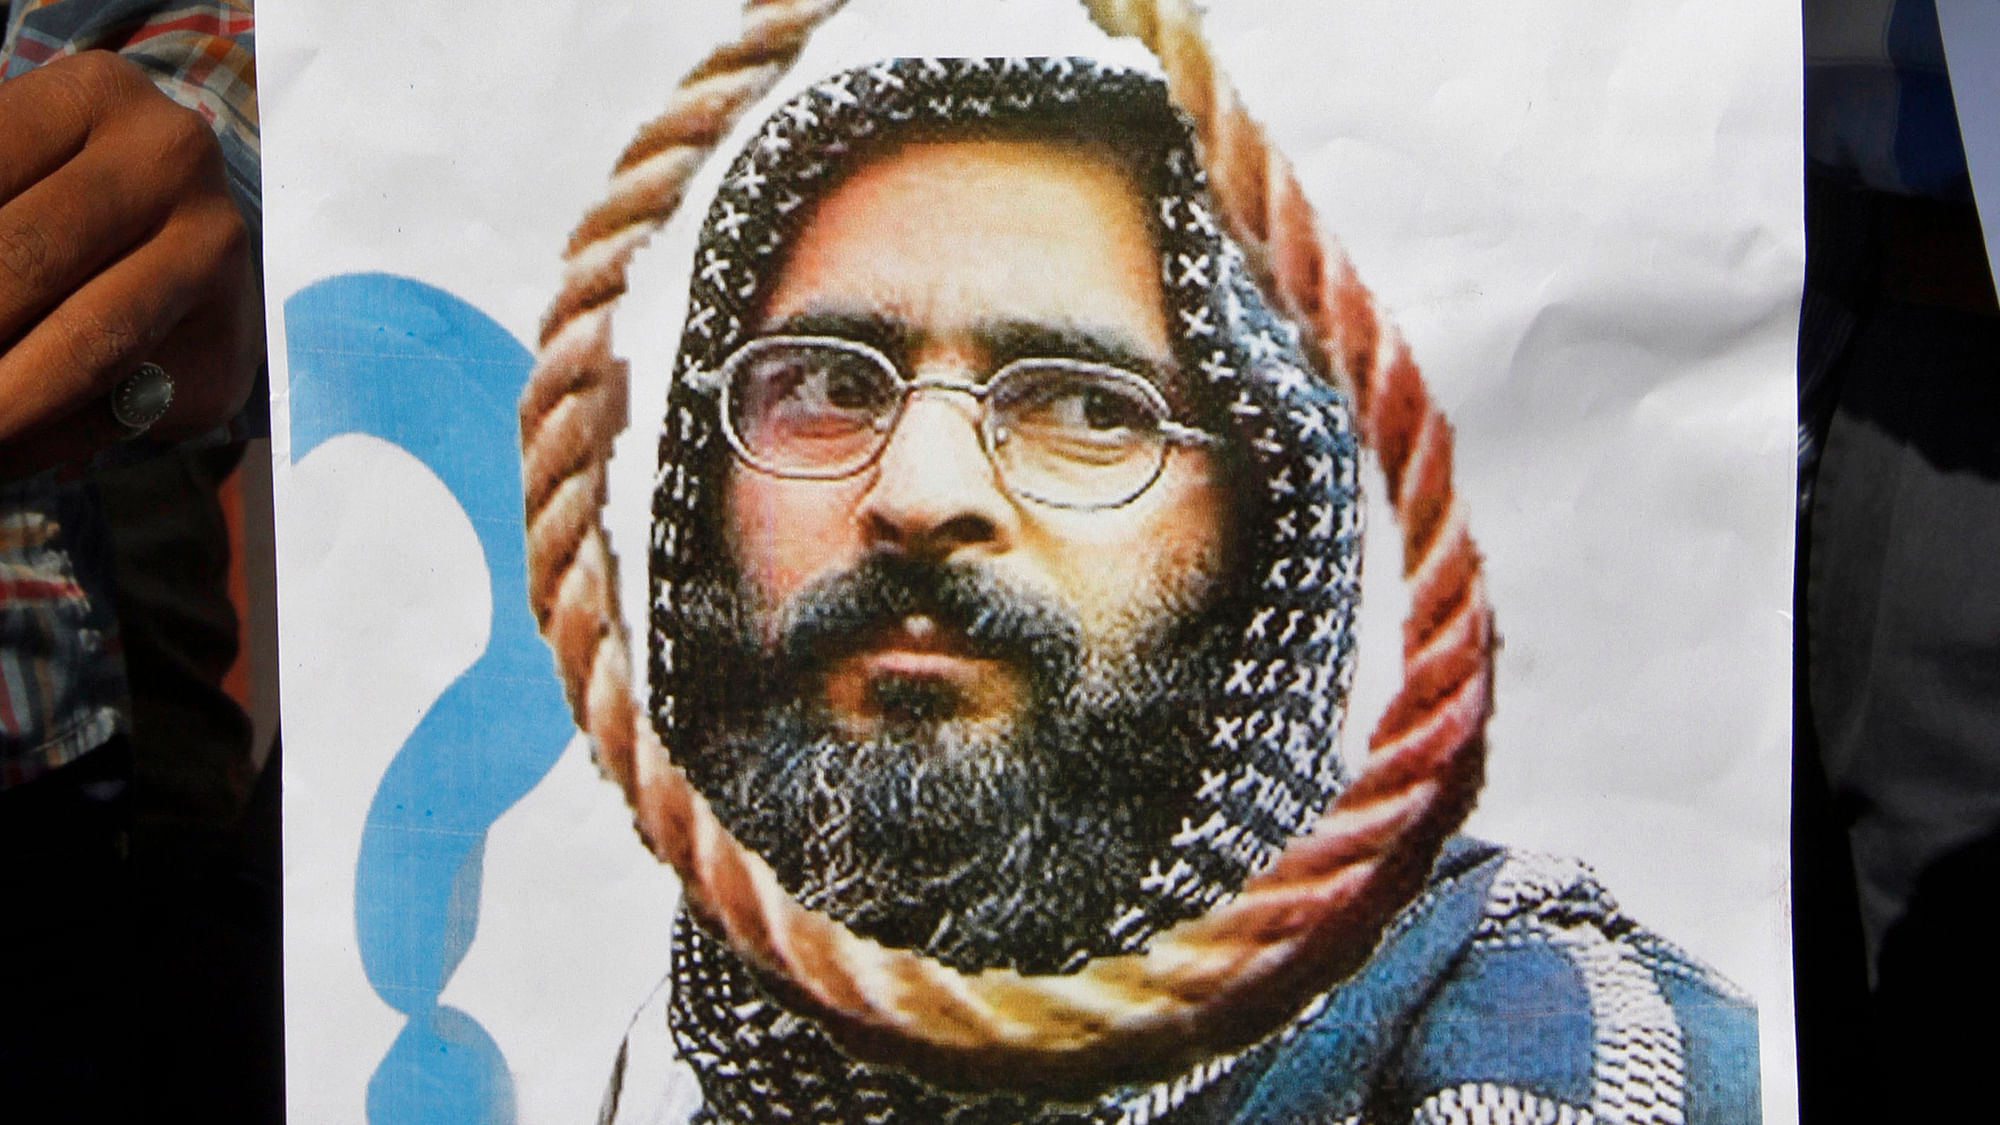 Afzal Guru was convicted for the 2001 Parliament attack &amp; hanged at Delhi’s Tihar Jail in 2013.&nbsp;